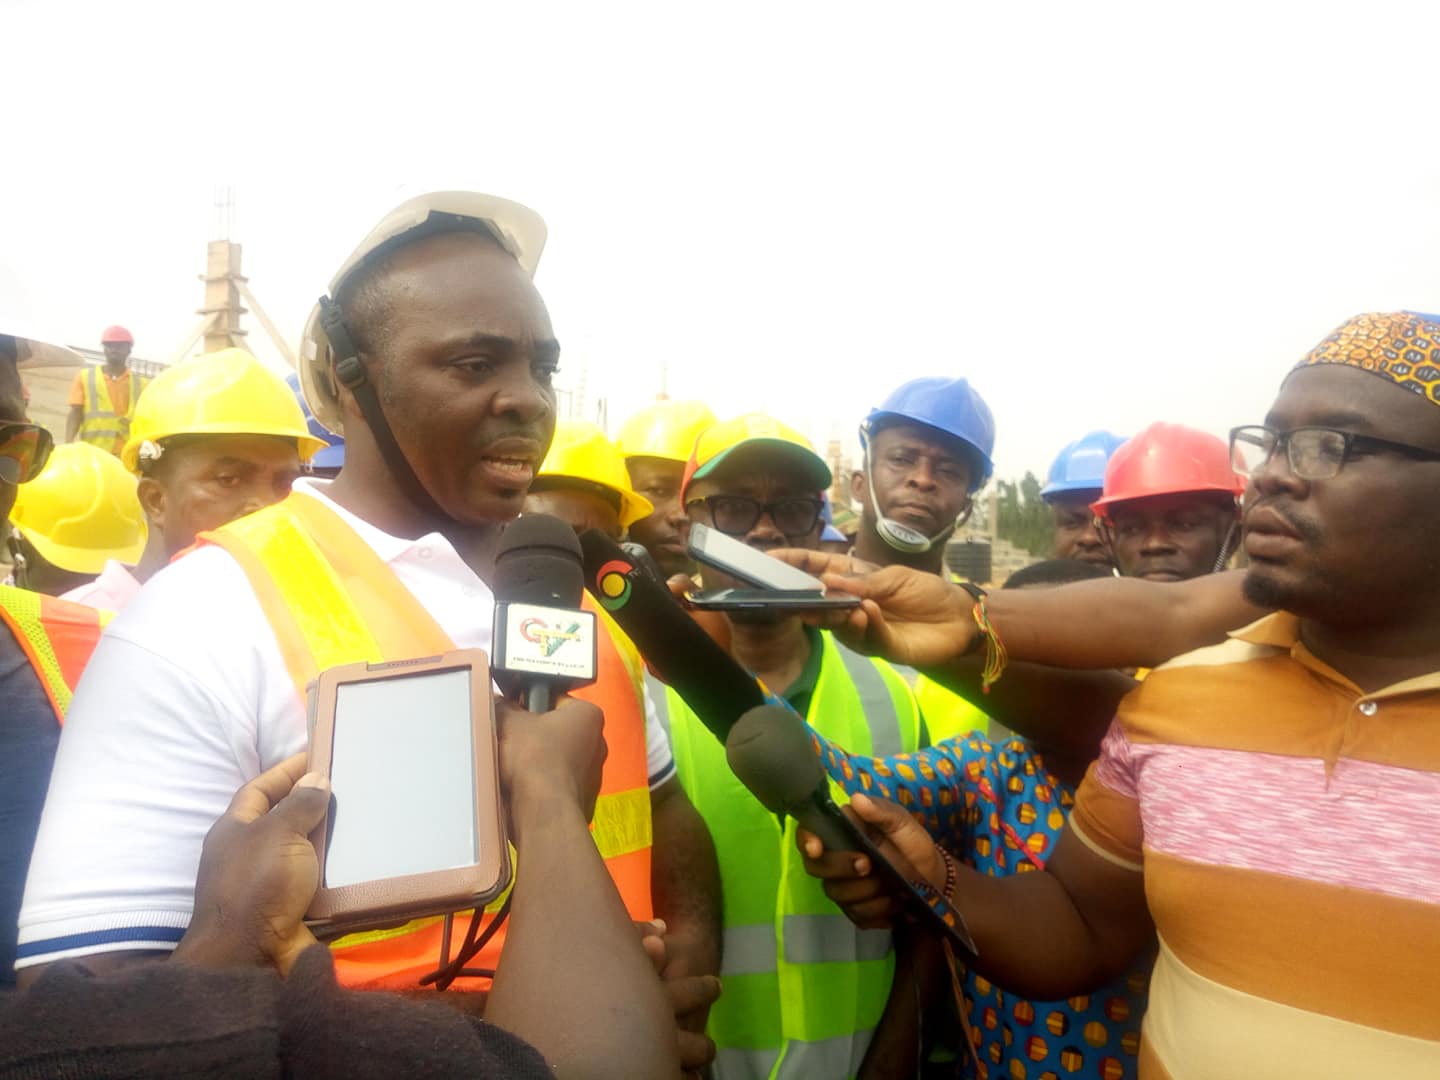 Sports Minister inspects progress of work at Dunkwa Youth Development Centre. 